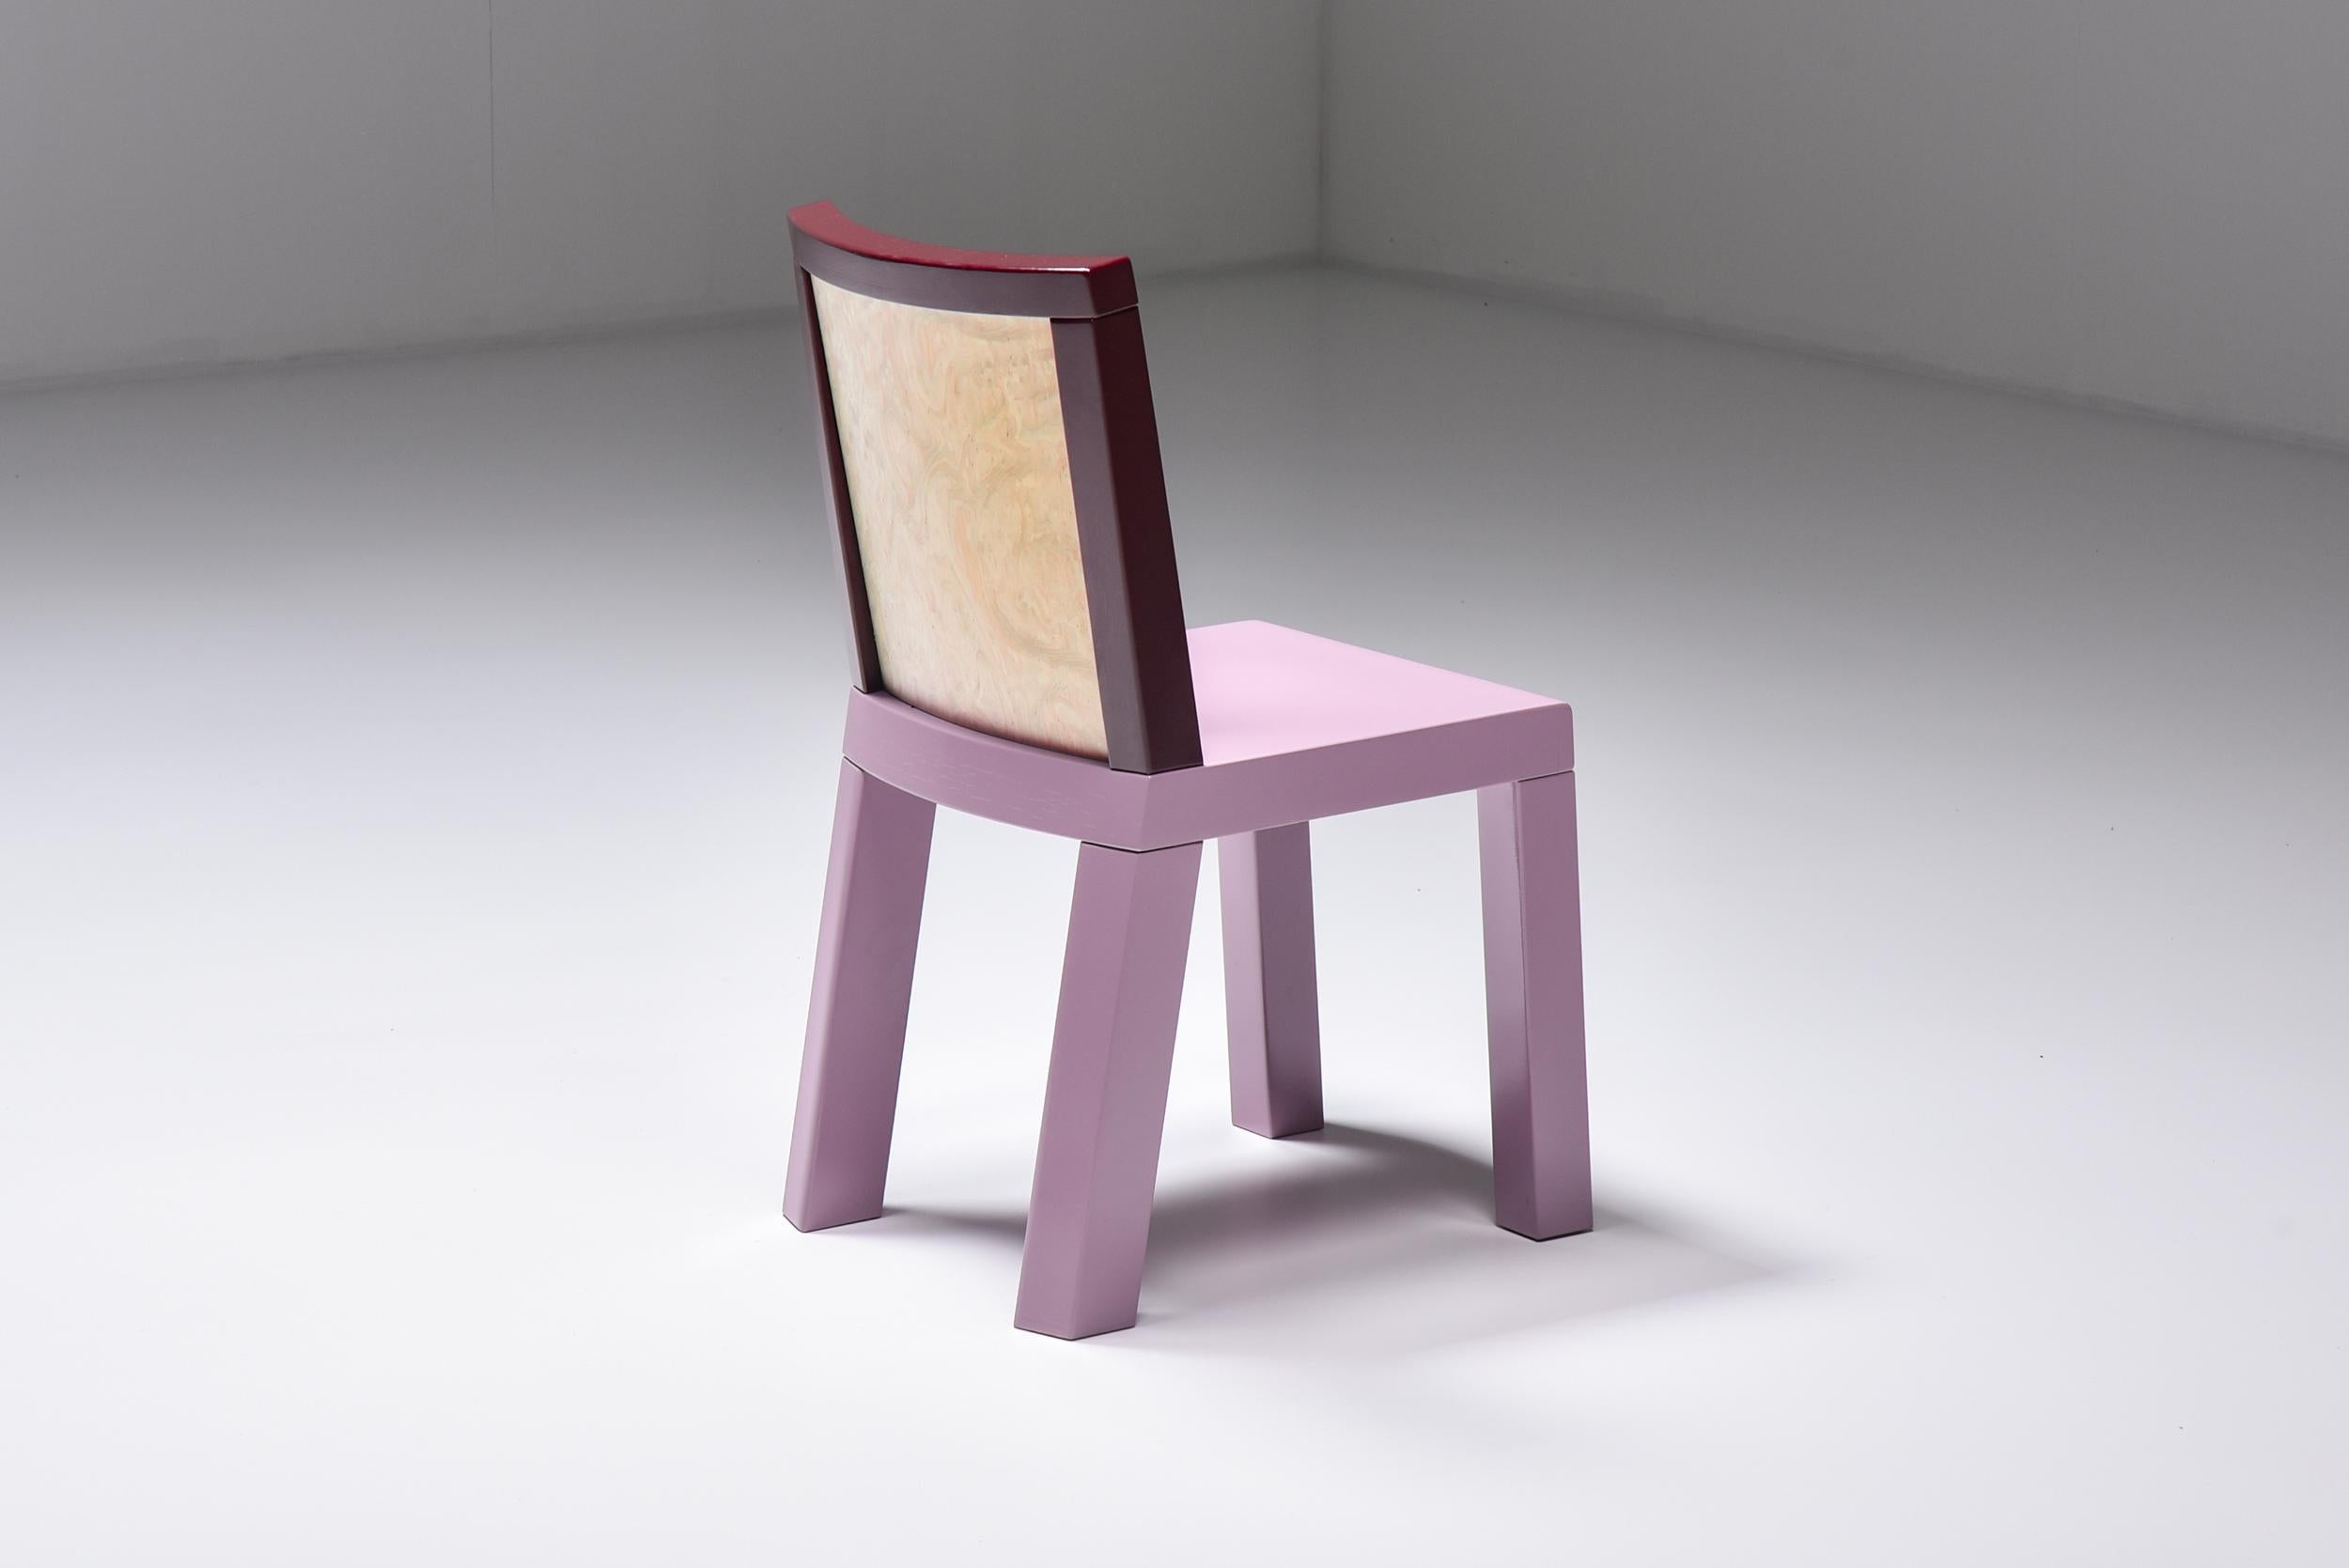 Pink, Sottsass, Leitner, Postmodern, chair, 1980s

dining chair with and expressive burl veneer and pink and burgundy lacquer.
Ettore Sottsass (14 September 1917 – 31 December 2007) was an Italian architect and designer during the 20th century.